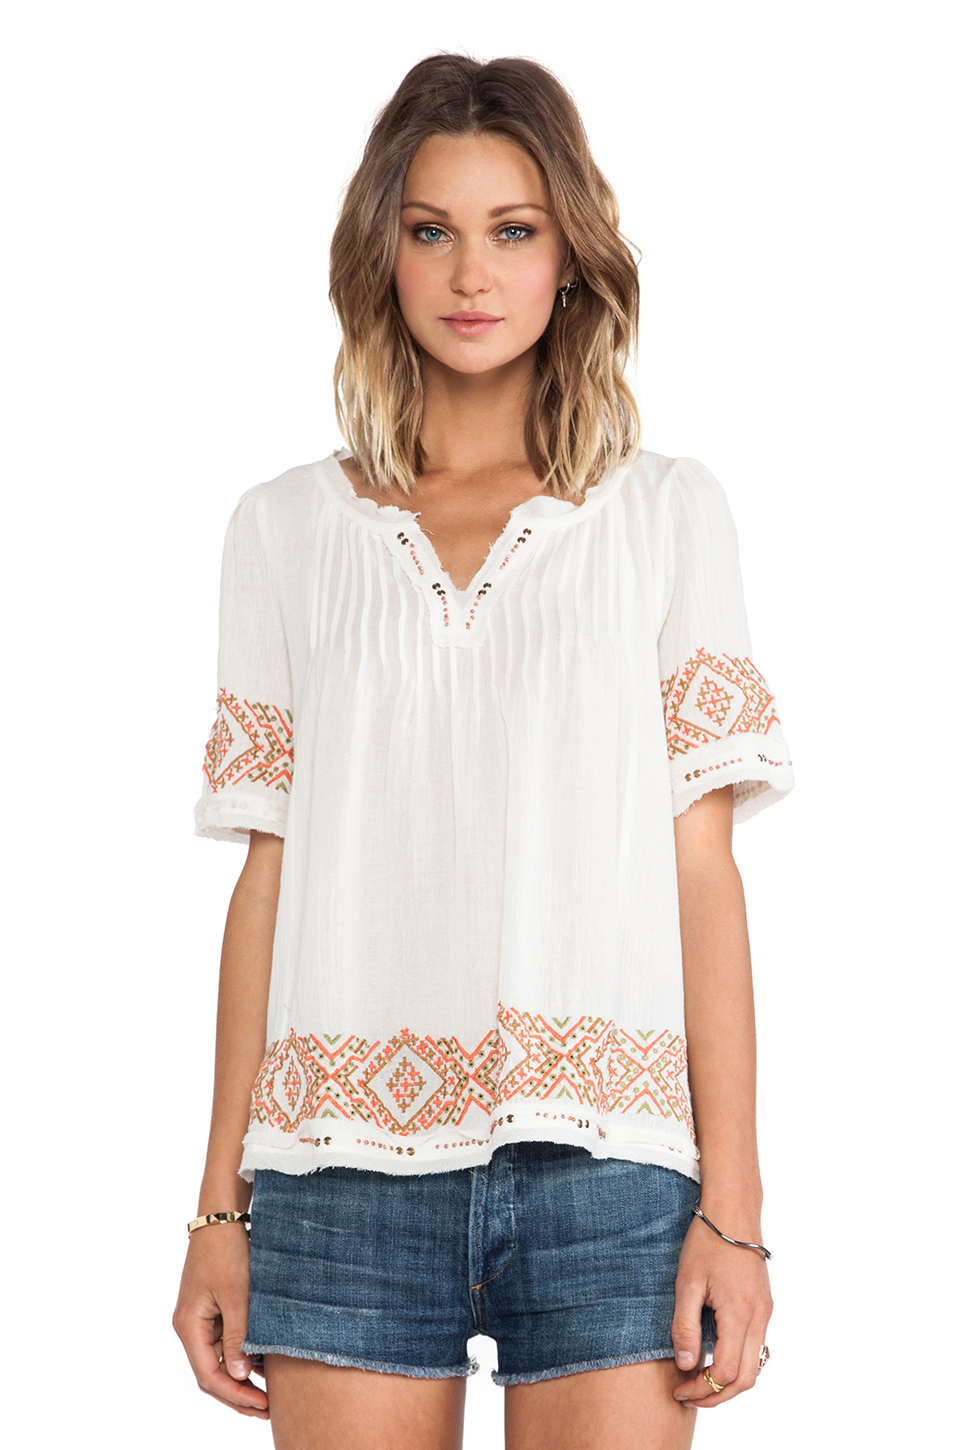 Velvet by graham & spencer Milie Cotton Gauze Embroidery Top in White ...